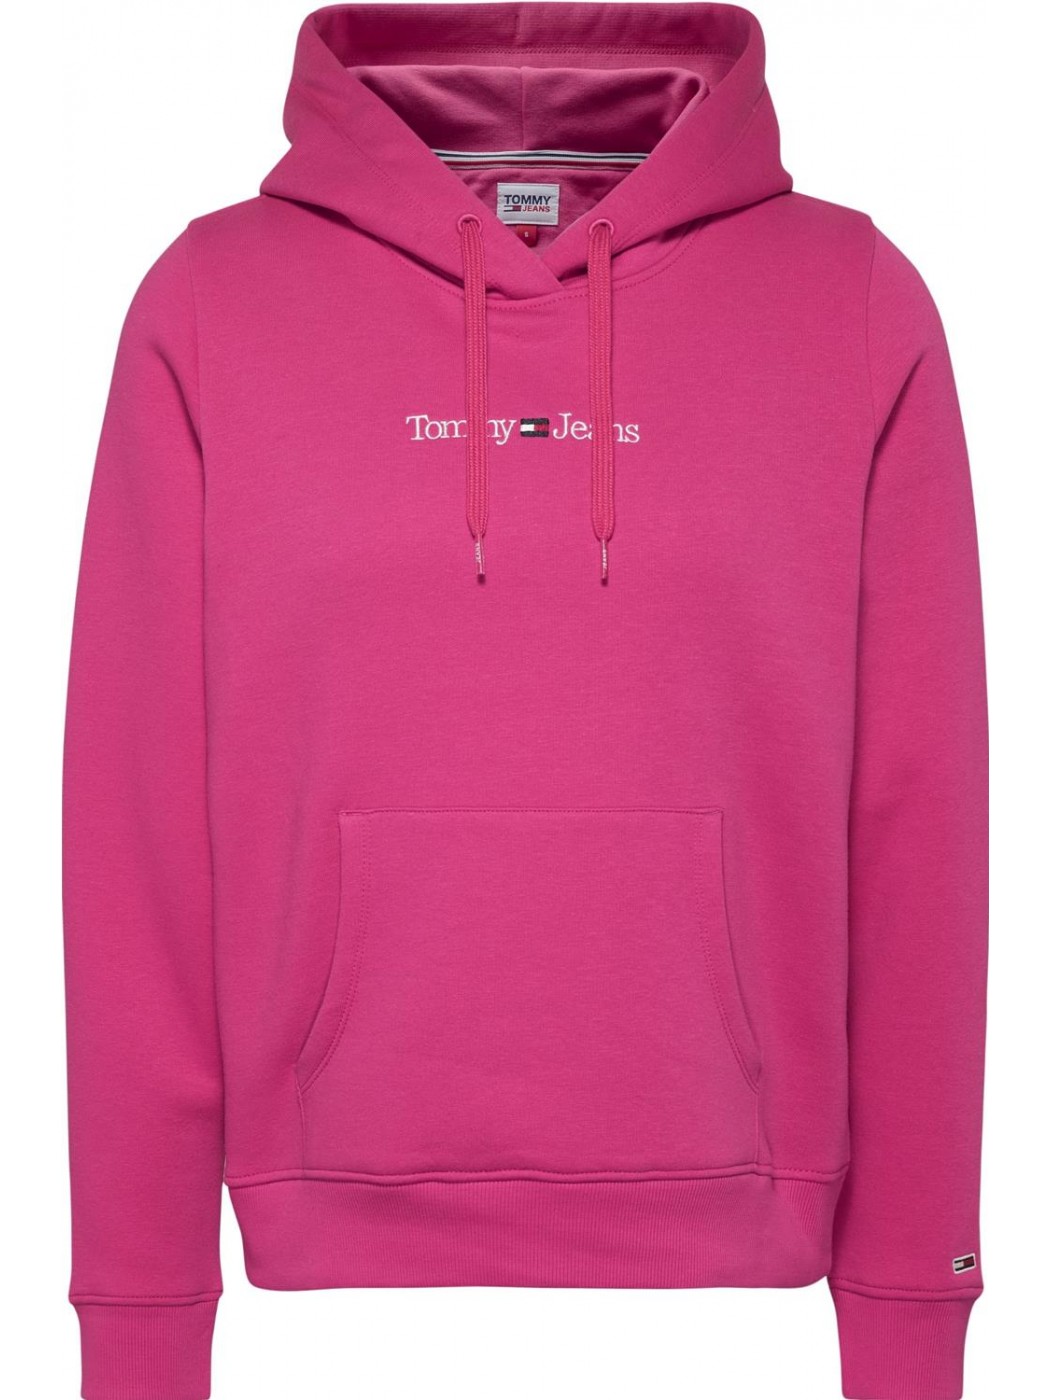 SUDADERA TOMMY JEANS MUJER...